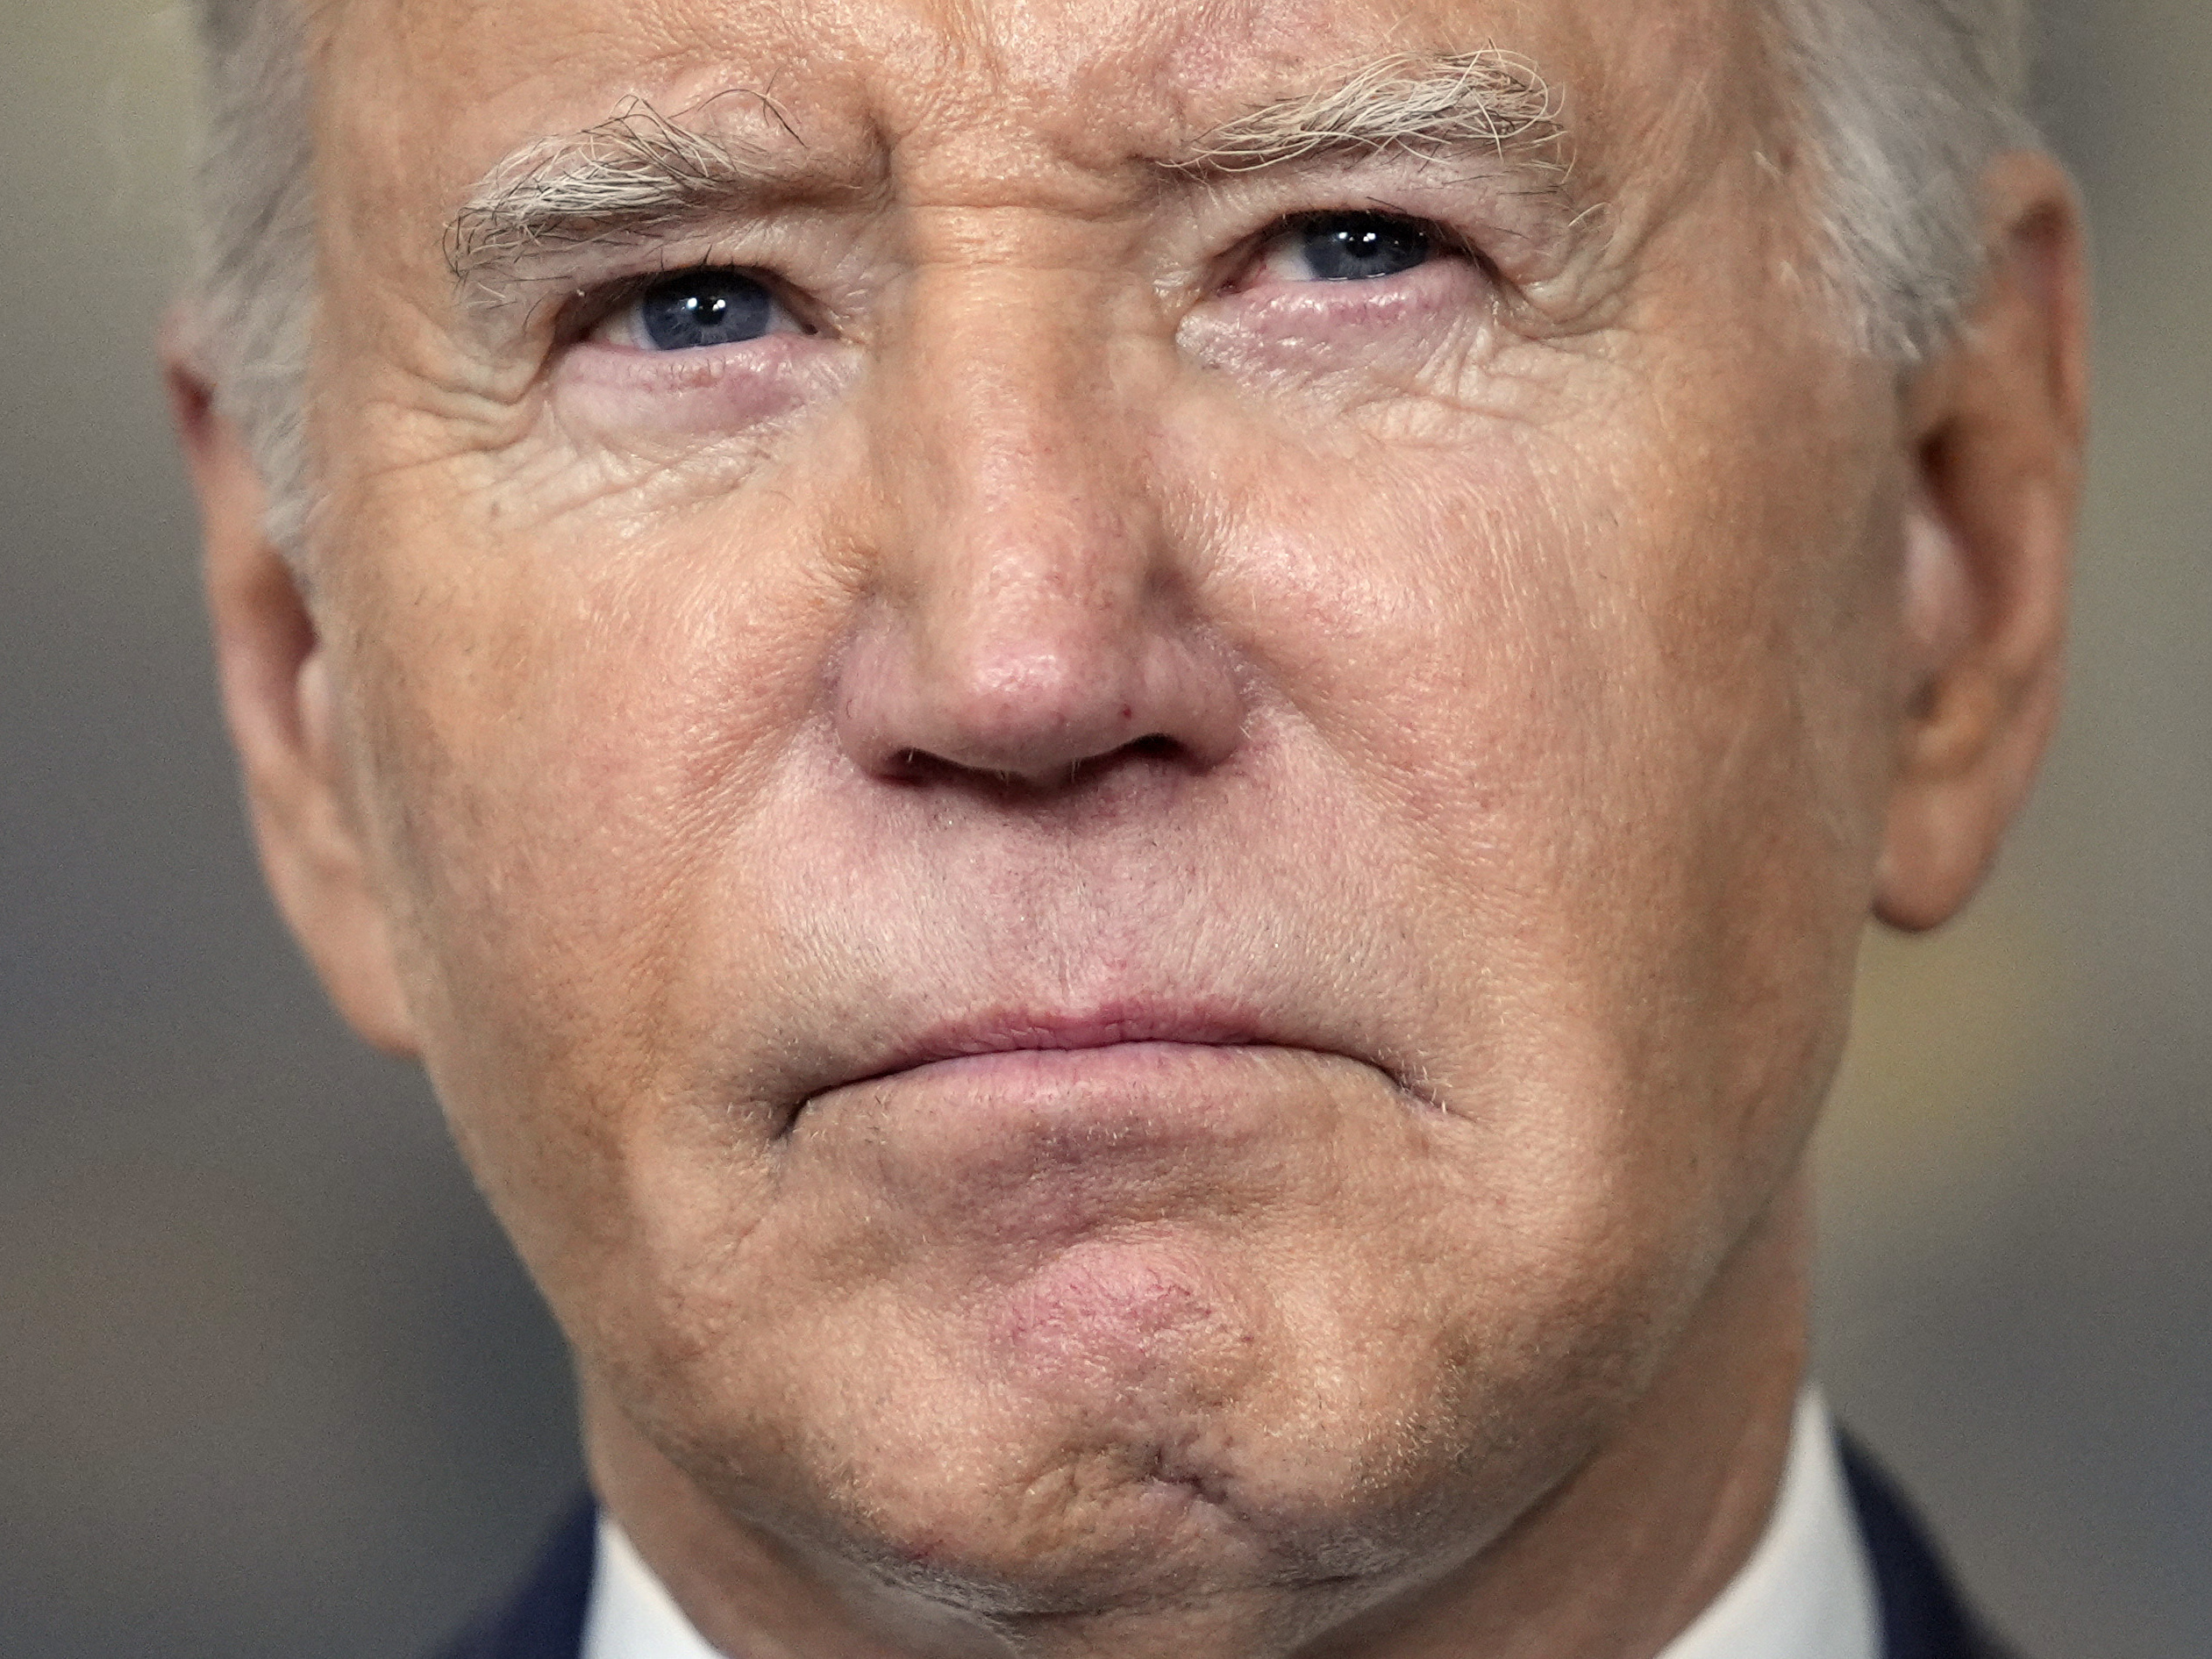 Interview transcript shows more nuance on Biden’s memory than special counsel report